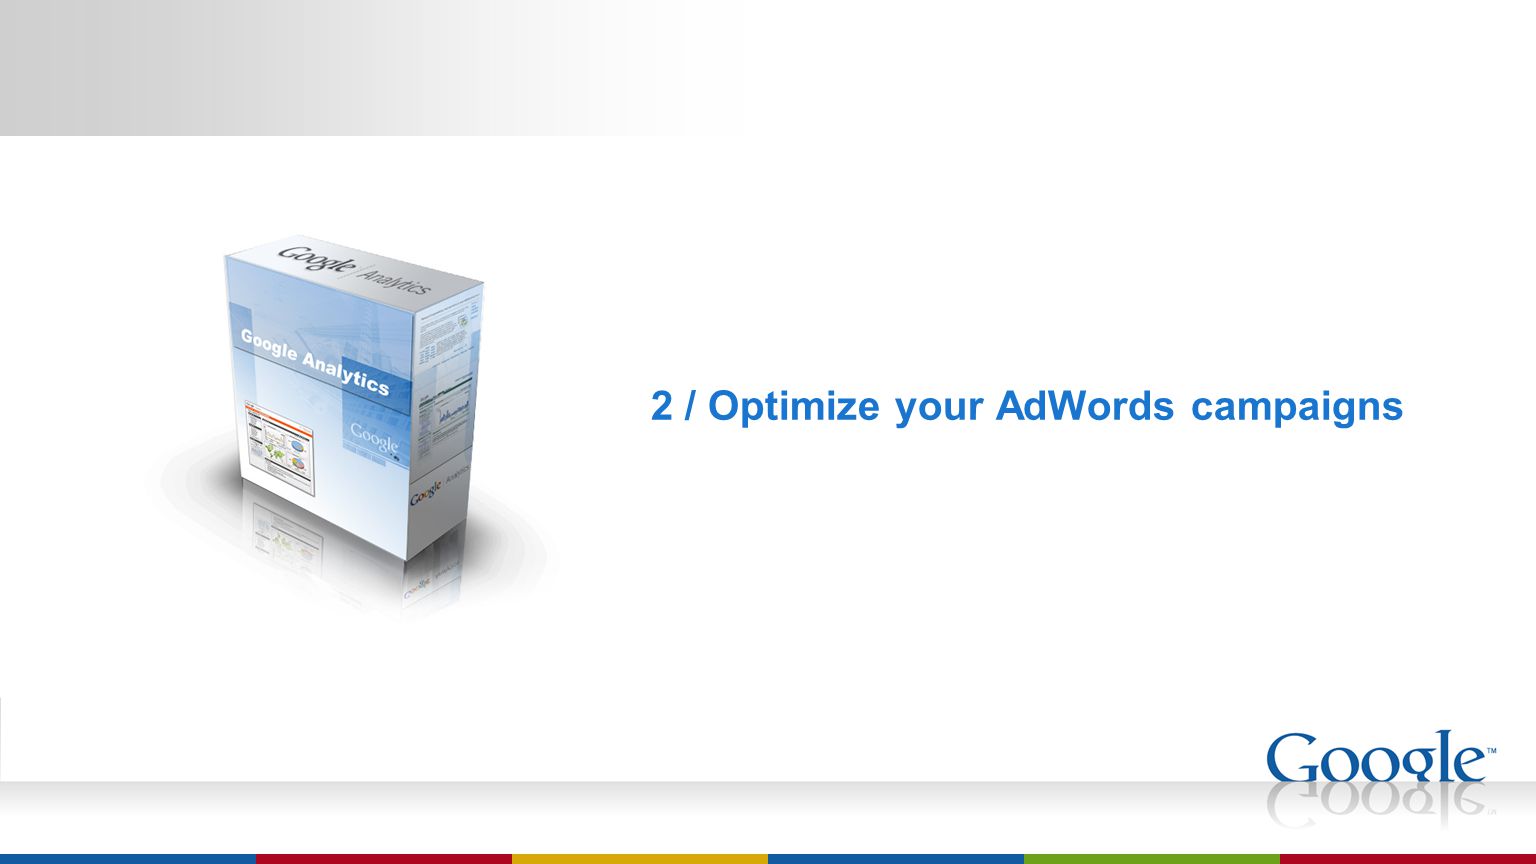 2 / Optimize your AdWords campaigns